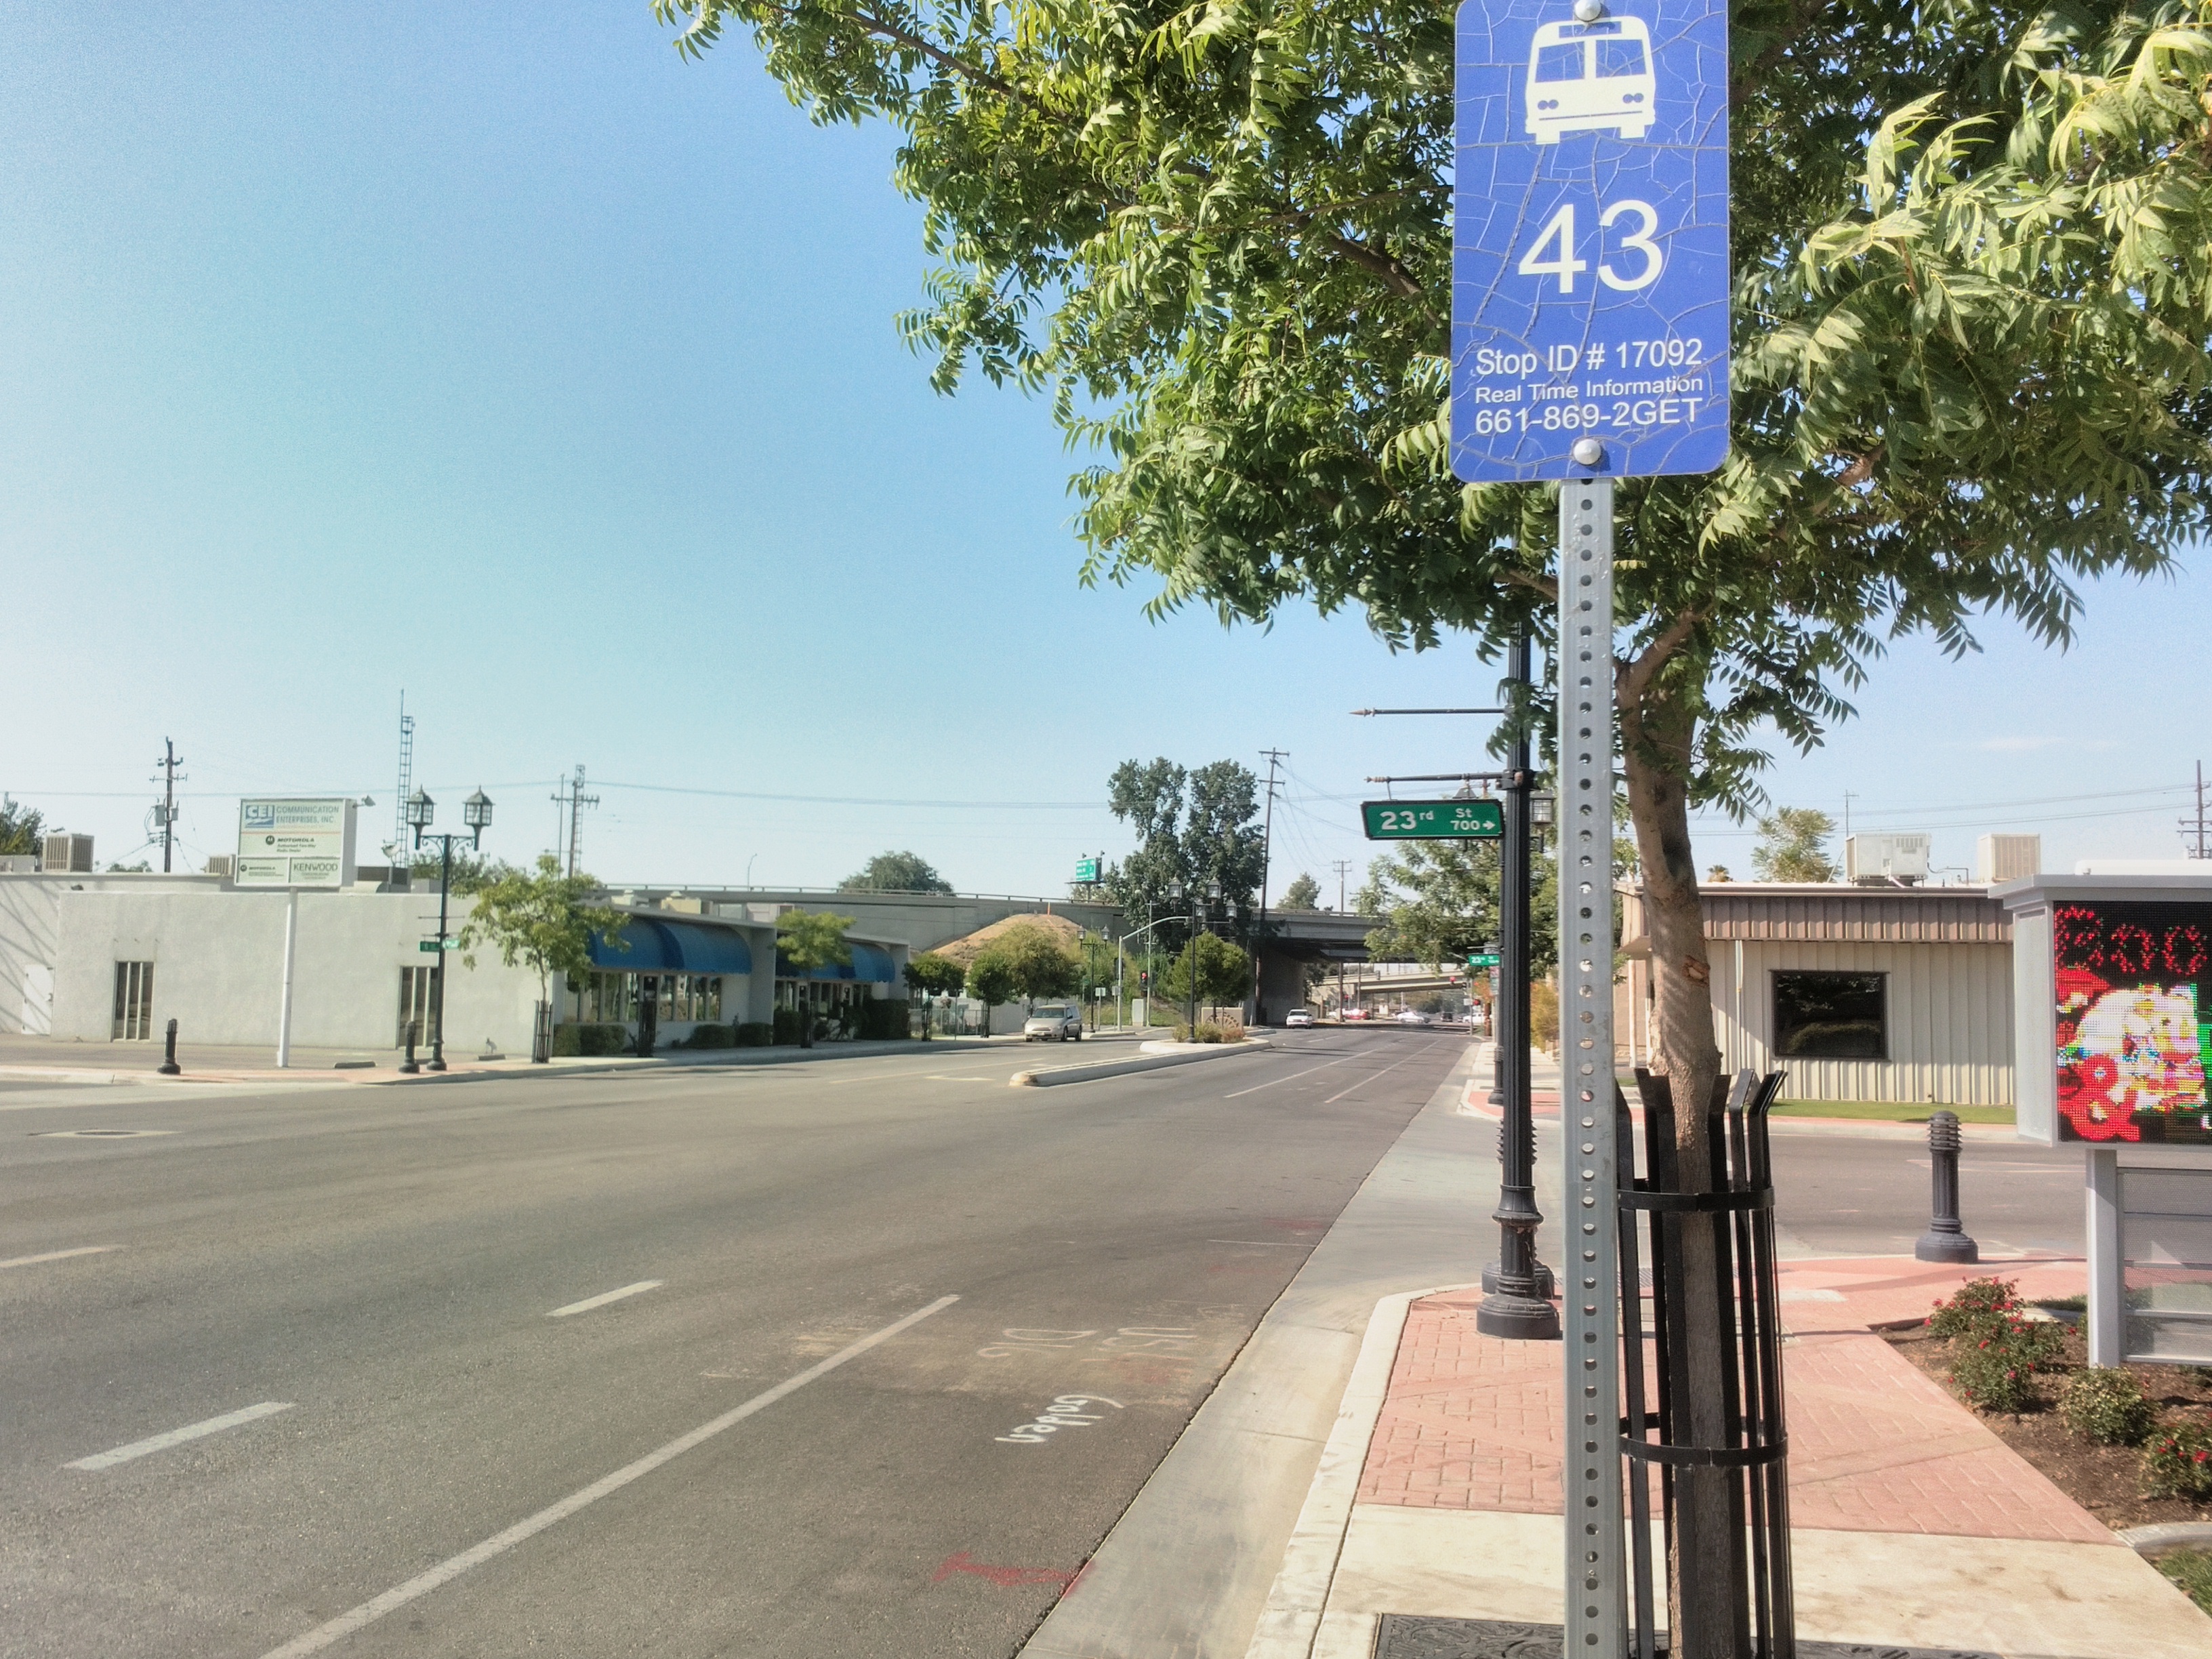 GET bus stop for Route 43, which was my ride home. Annoyingly, it lacks a QR code for GET’s realtime arrival system.